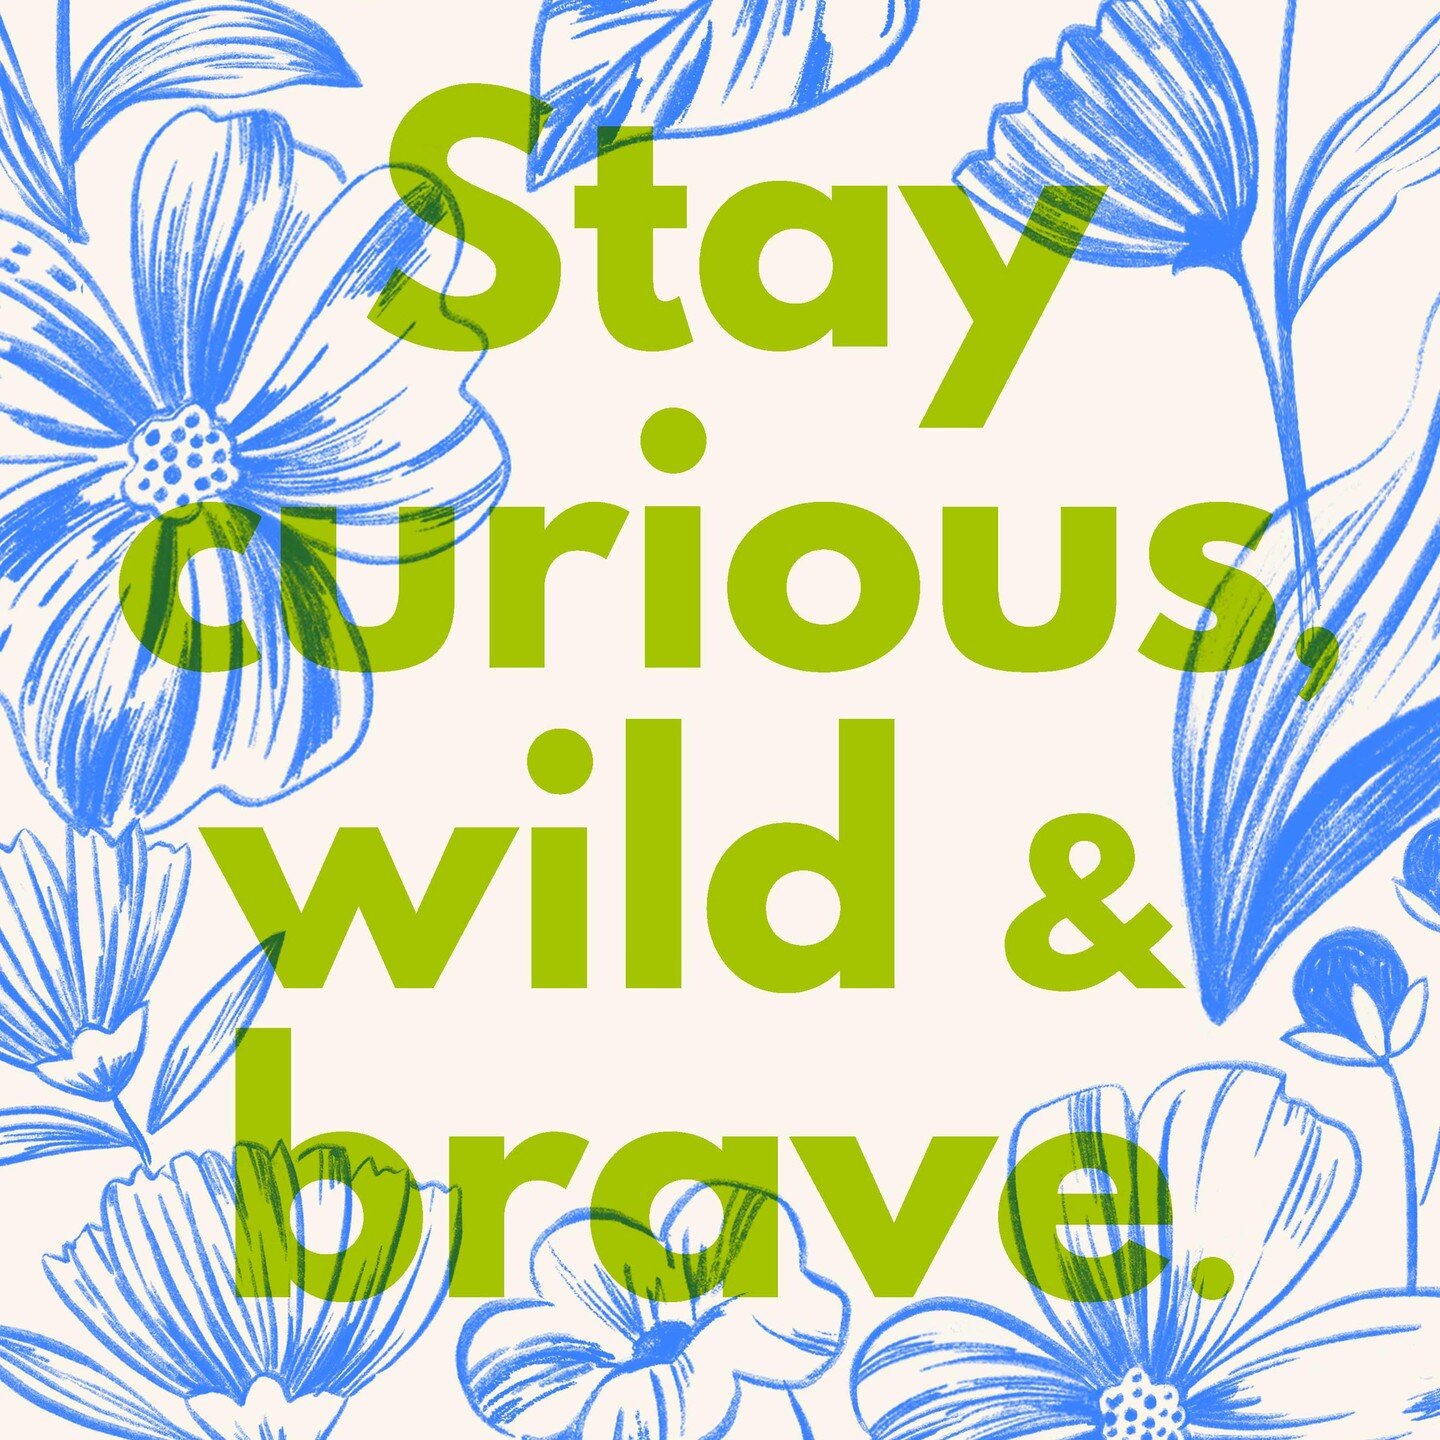 Feeling all the colour, hope and joy from @wearescip &lsquo;The Positivity Show&rsquo;.

Super happy to be part of this. Showcasing a new print - Stay curious, wild &amp; brave along with my @chooselove screenprint and We Stand stronger together.

Ch